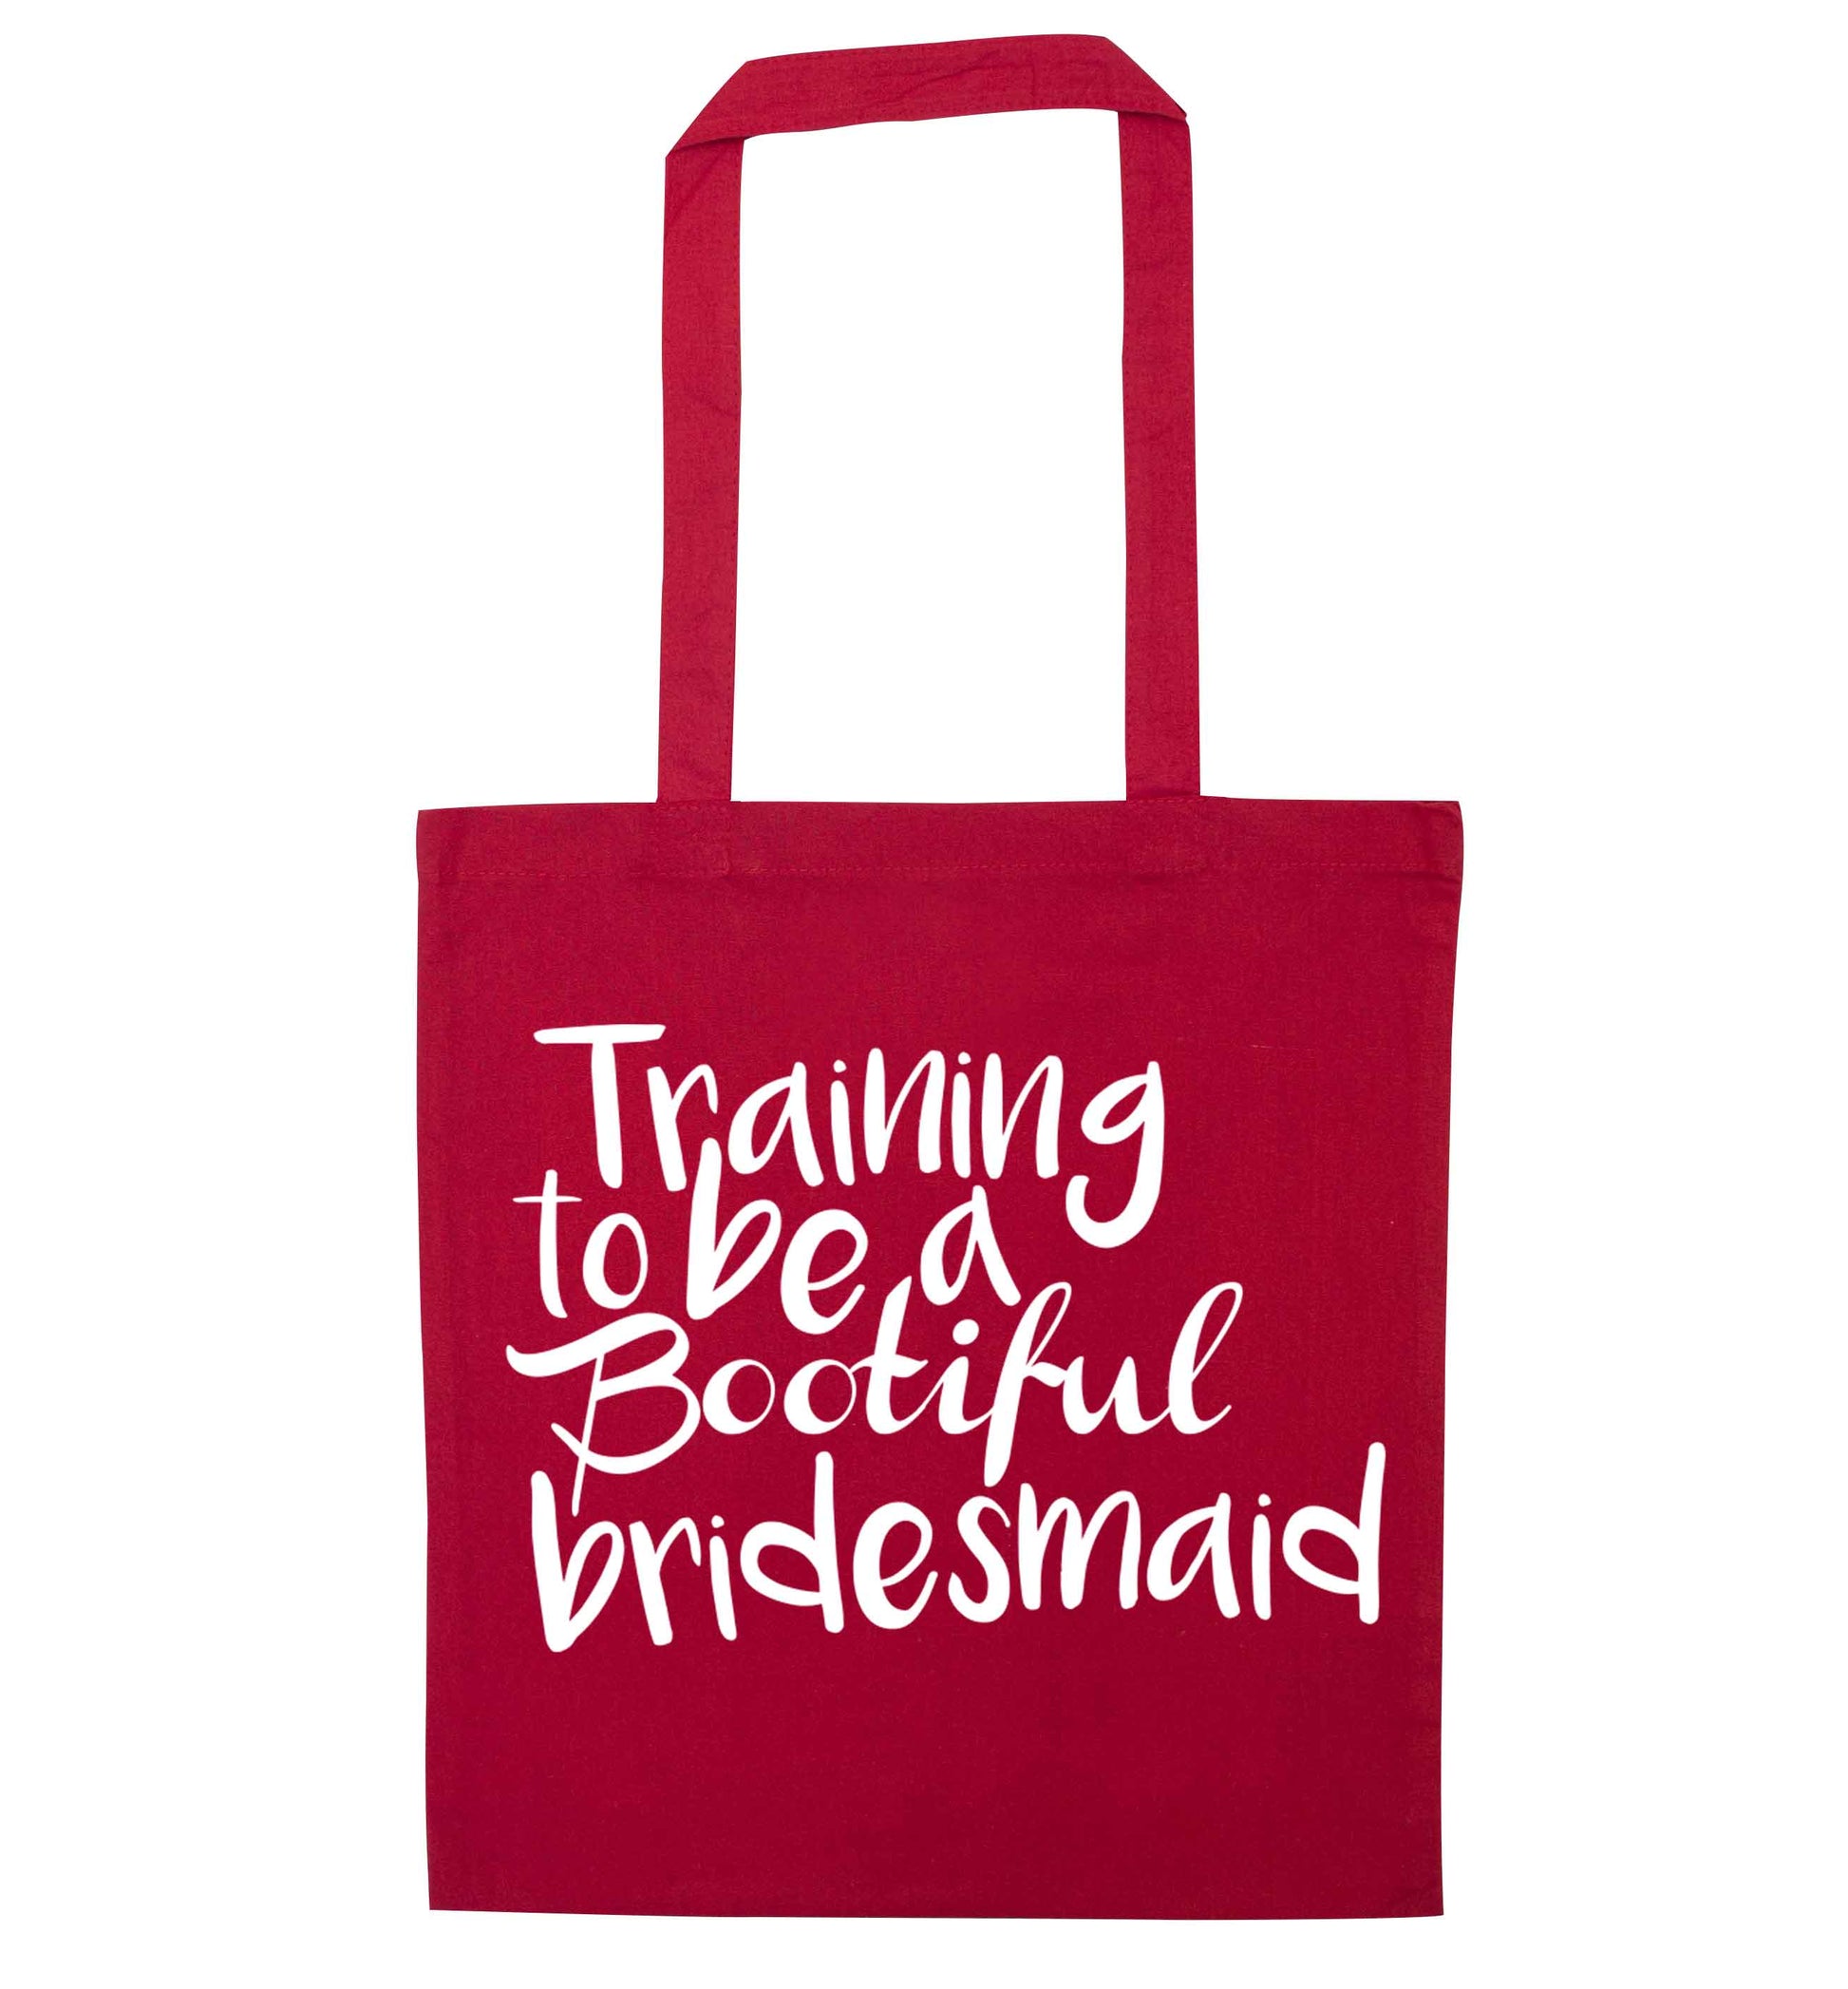 Get motivated and get fit for your big day! Our workout quotes and designs will get you ready to sweat! Perfect for any bride, groom or bridesmaid to be!  red tote bag